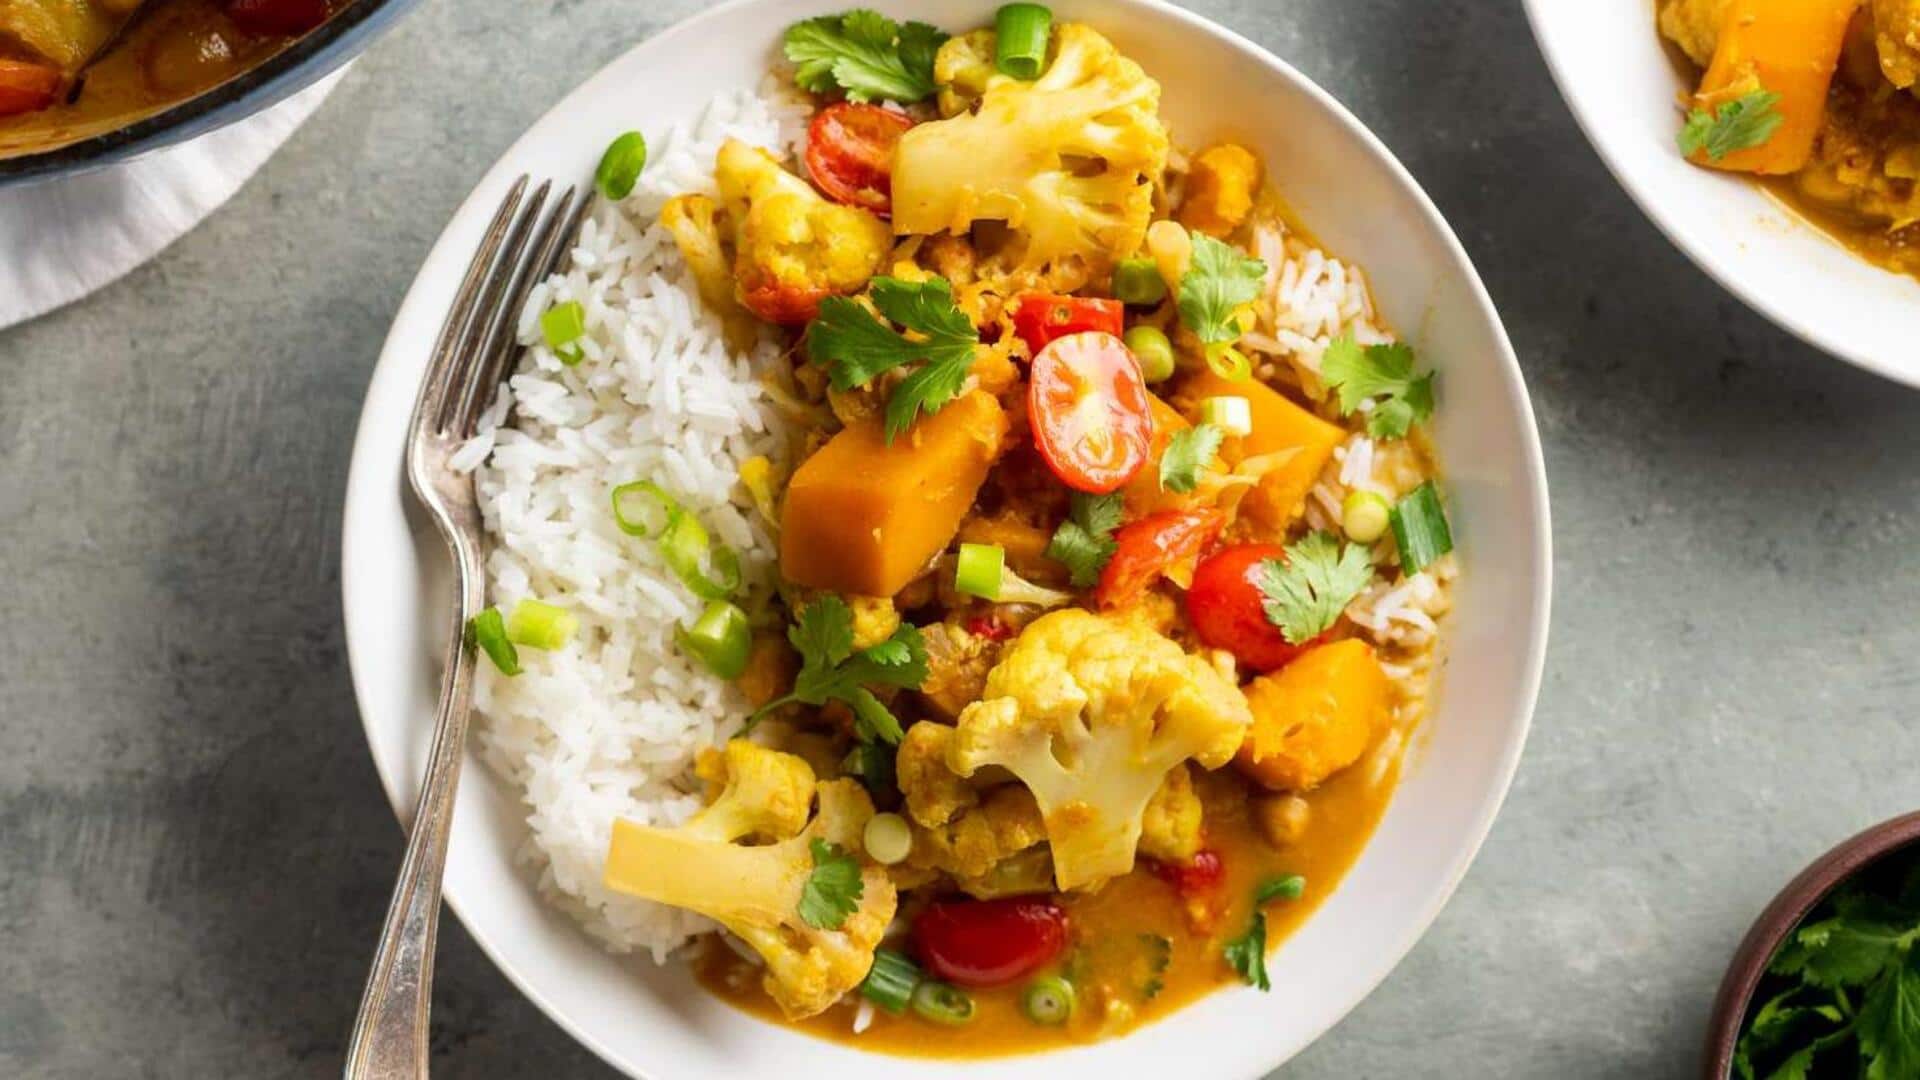 Impress your guests with this Thai massaman curry recipe